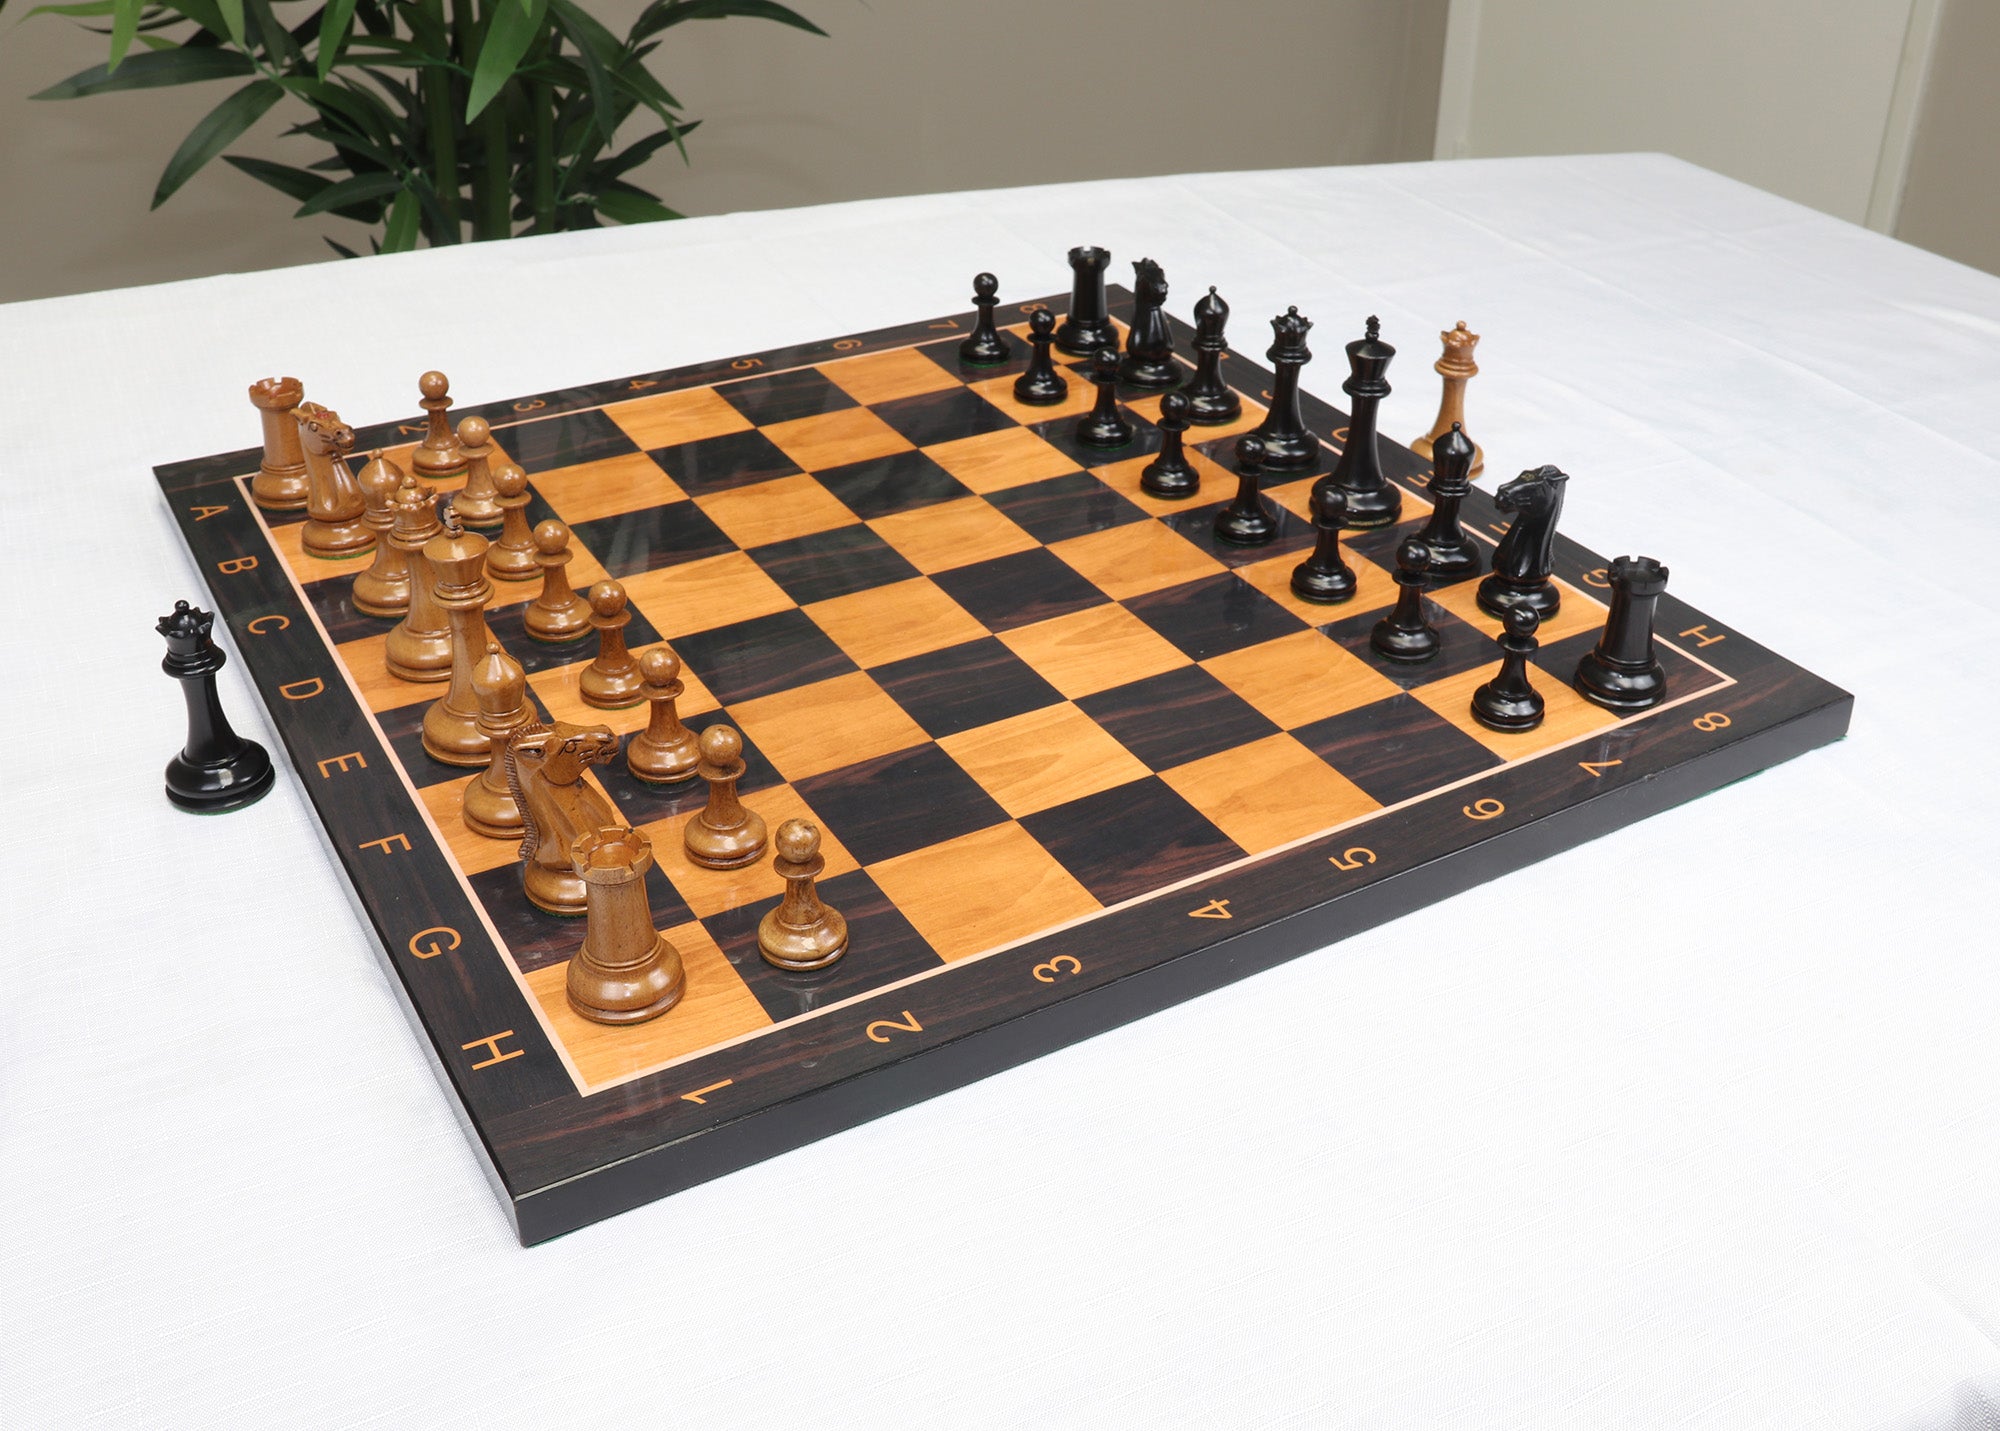 The Leuchars Series Luxury Staunton Reproduced Distressed Chess Pieces - 3.6’’KING